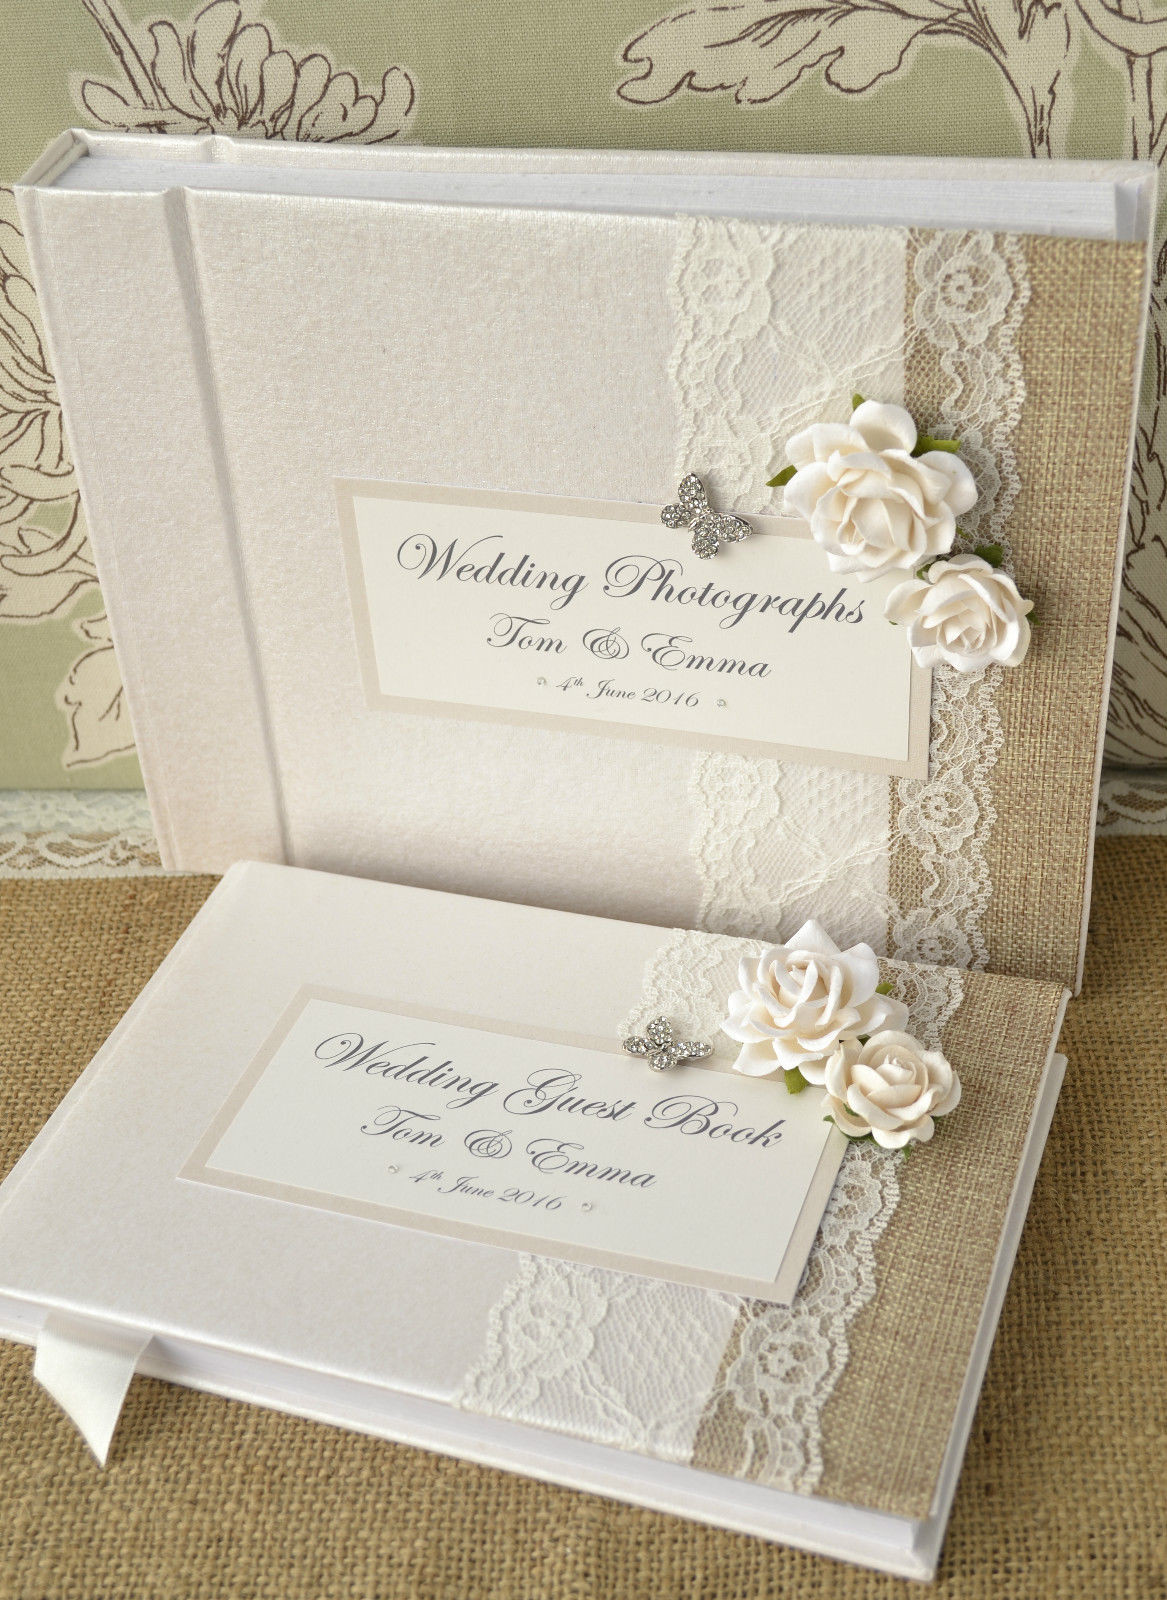 Wedding Guest Book Layout
 Luxury Personalised Wedding Guest Book & Album Set Lace